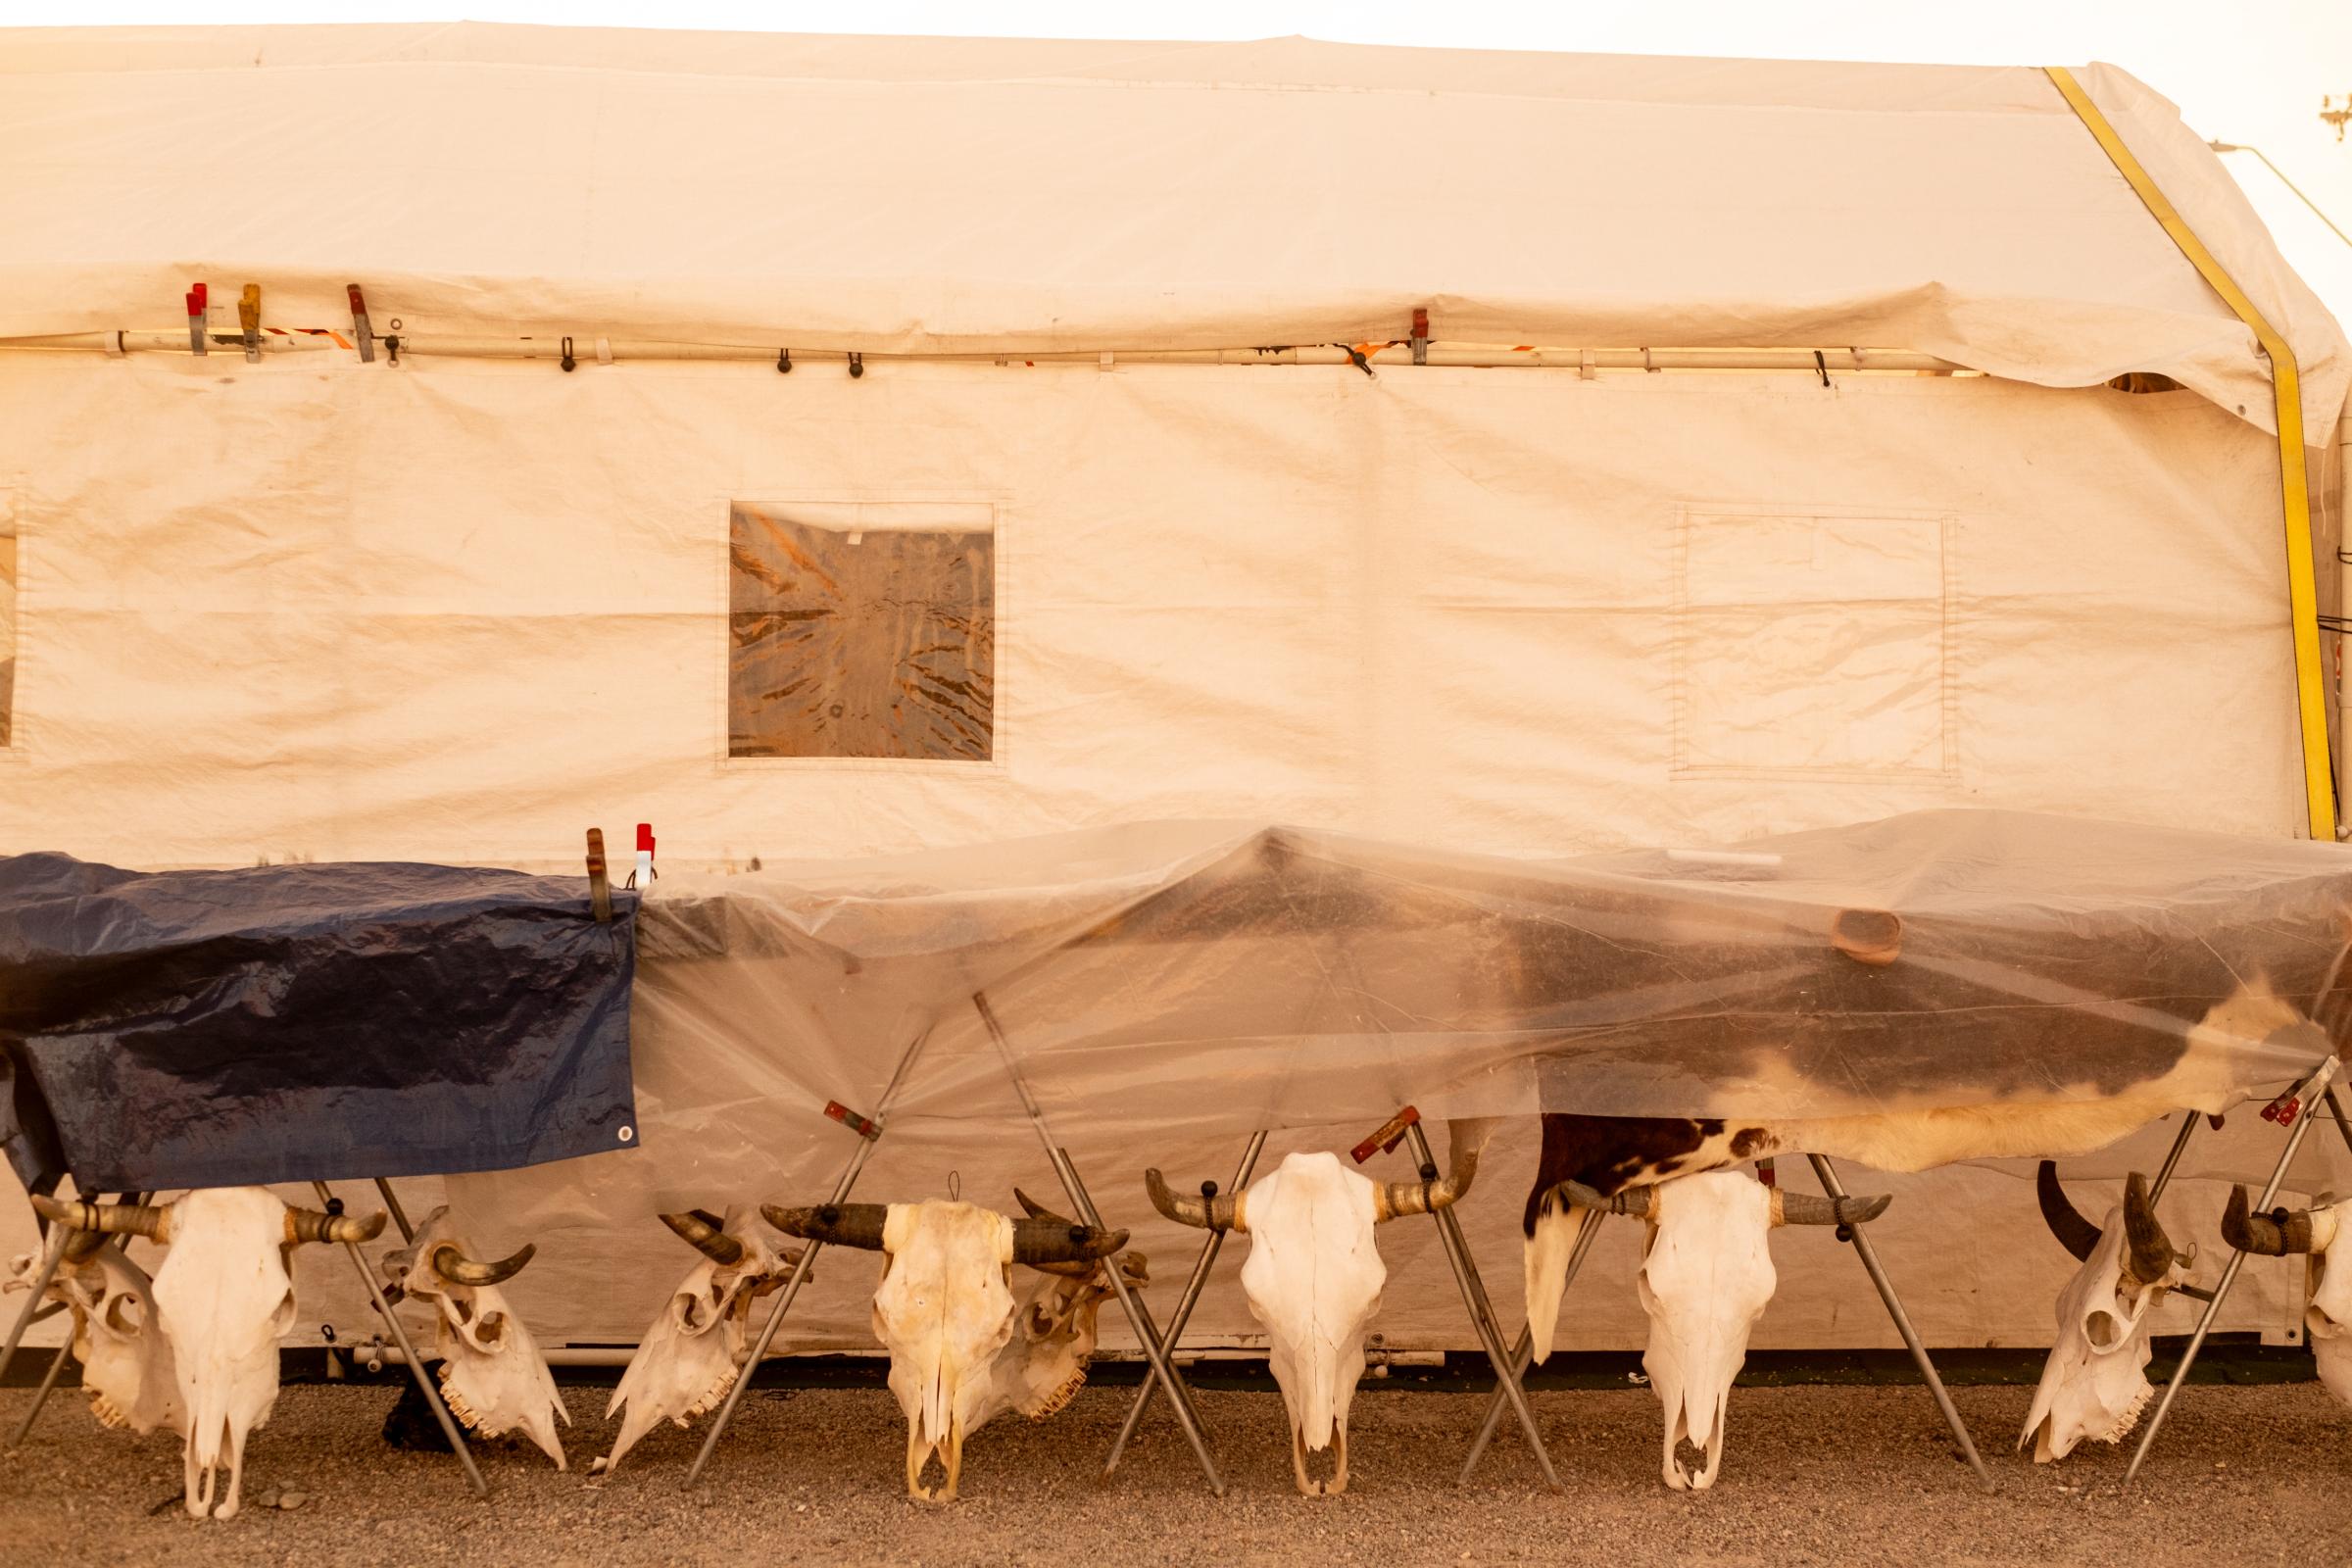 A Warm Winter (An Ongoing Journey) - A taxidermy stand in Quartzsite, Arizona.